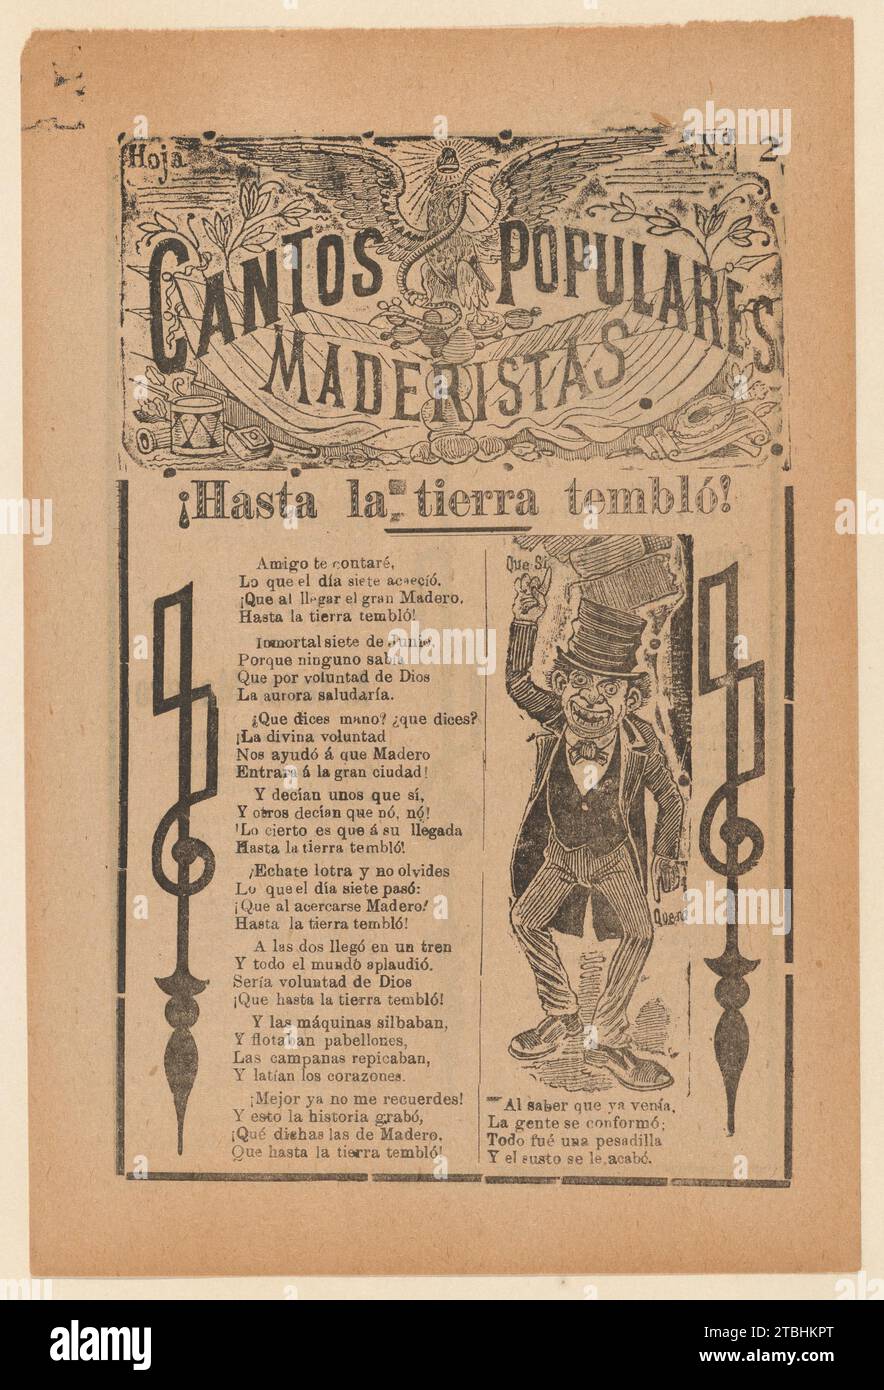 Broadsheet celebrating one of the founders of the Mexican Revolution, Francisco Madero, shown in a suit and top hat pointing to the phrases 'Que Si' and 'Que No' 1946 by Jose Guadalupe Posada Stock Photo